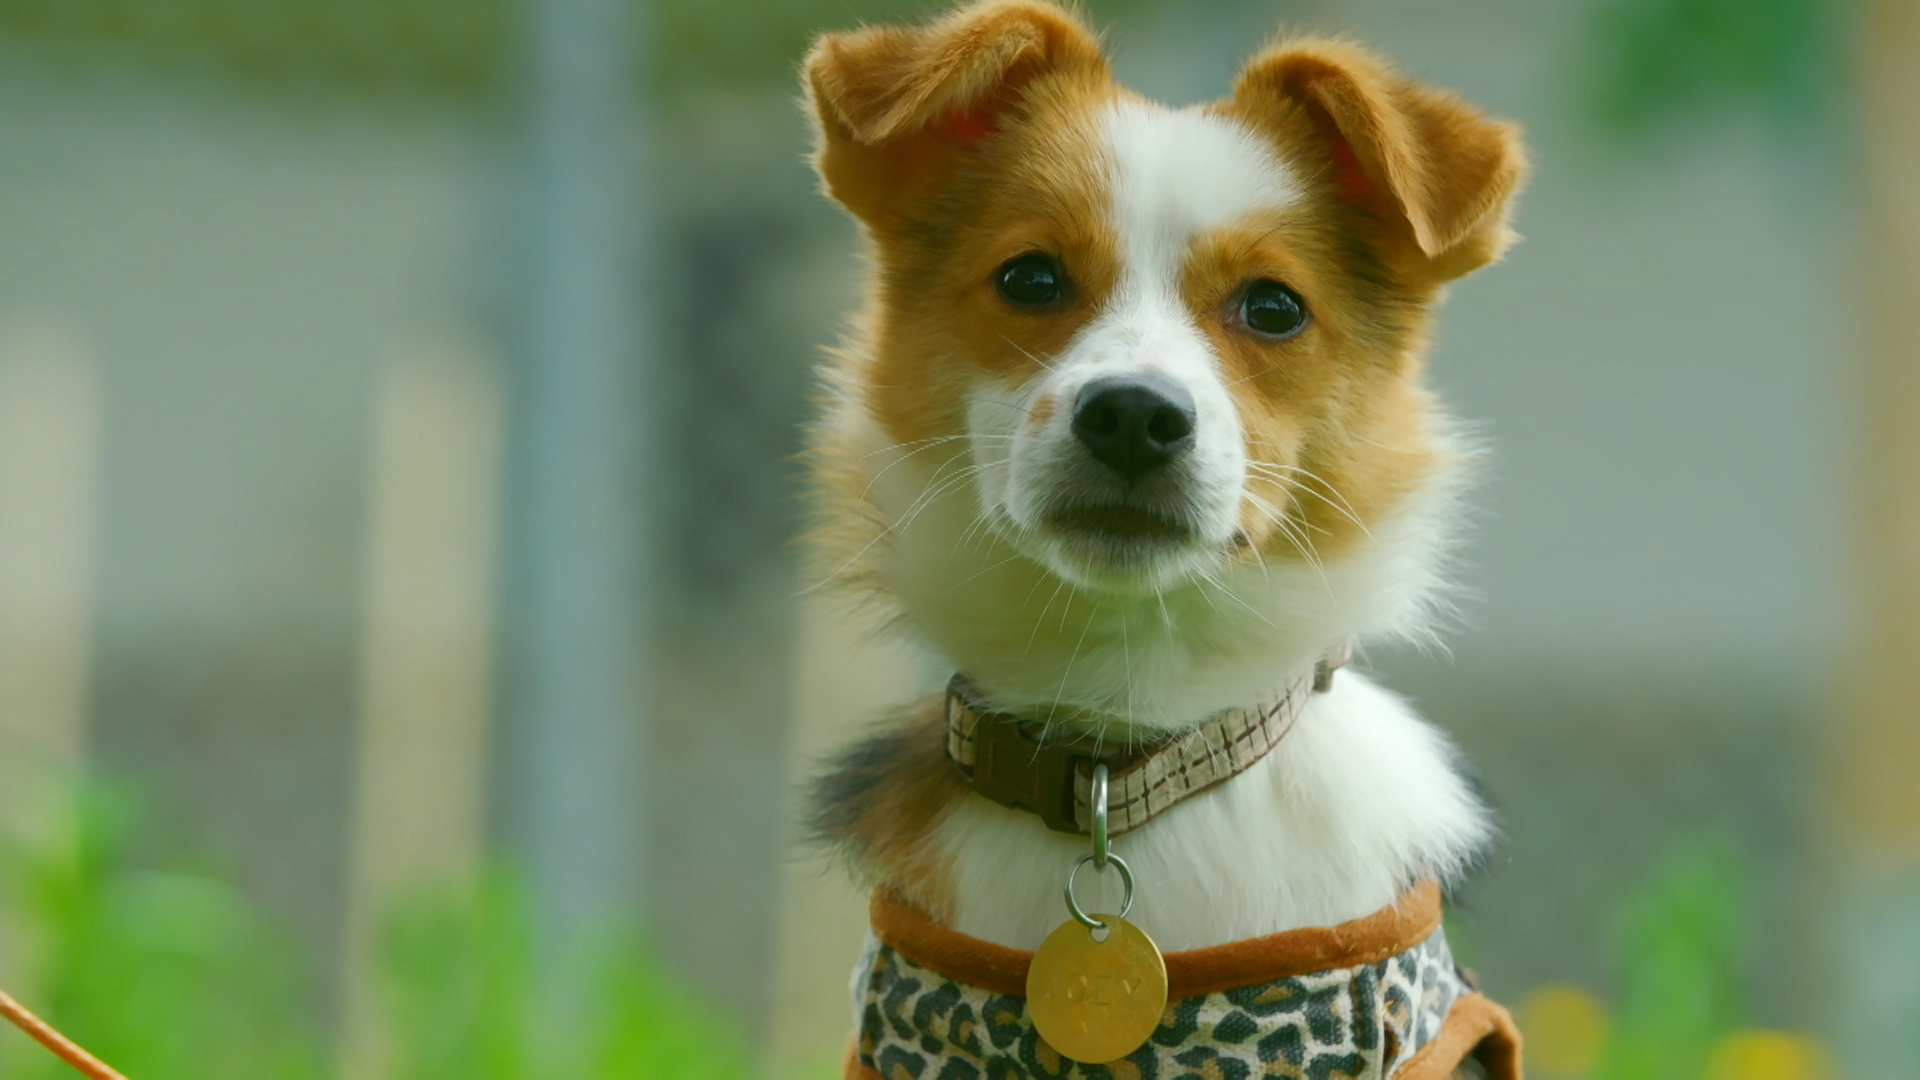 Paws What You're Doing & Watch the Trailer for 'The Dog House: UK' (VIDEO)